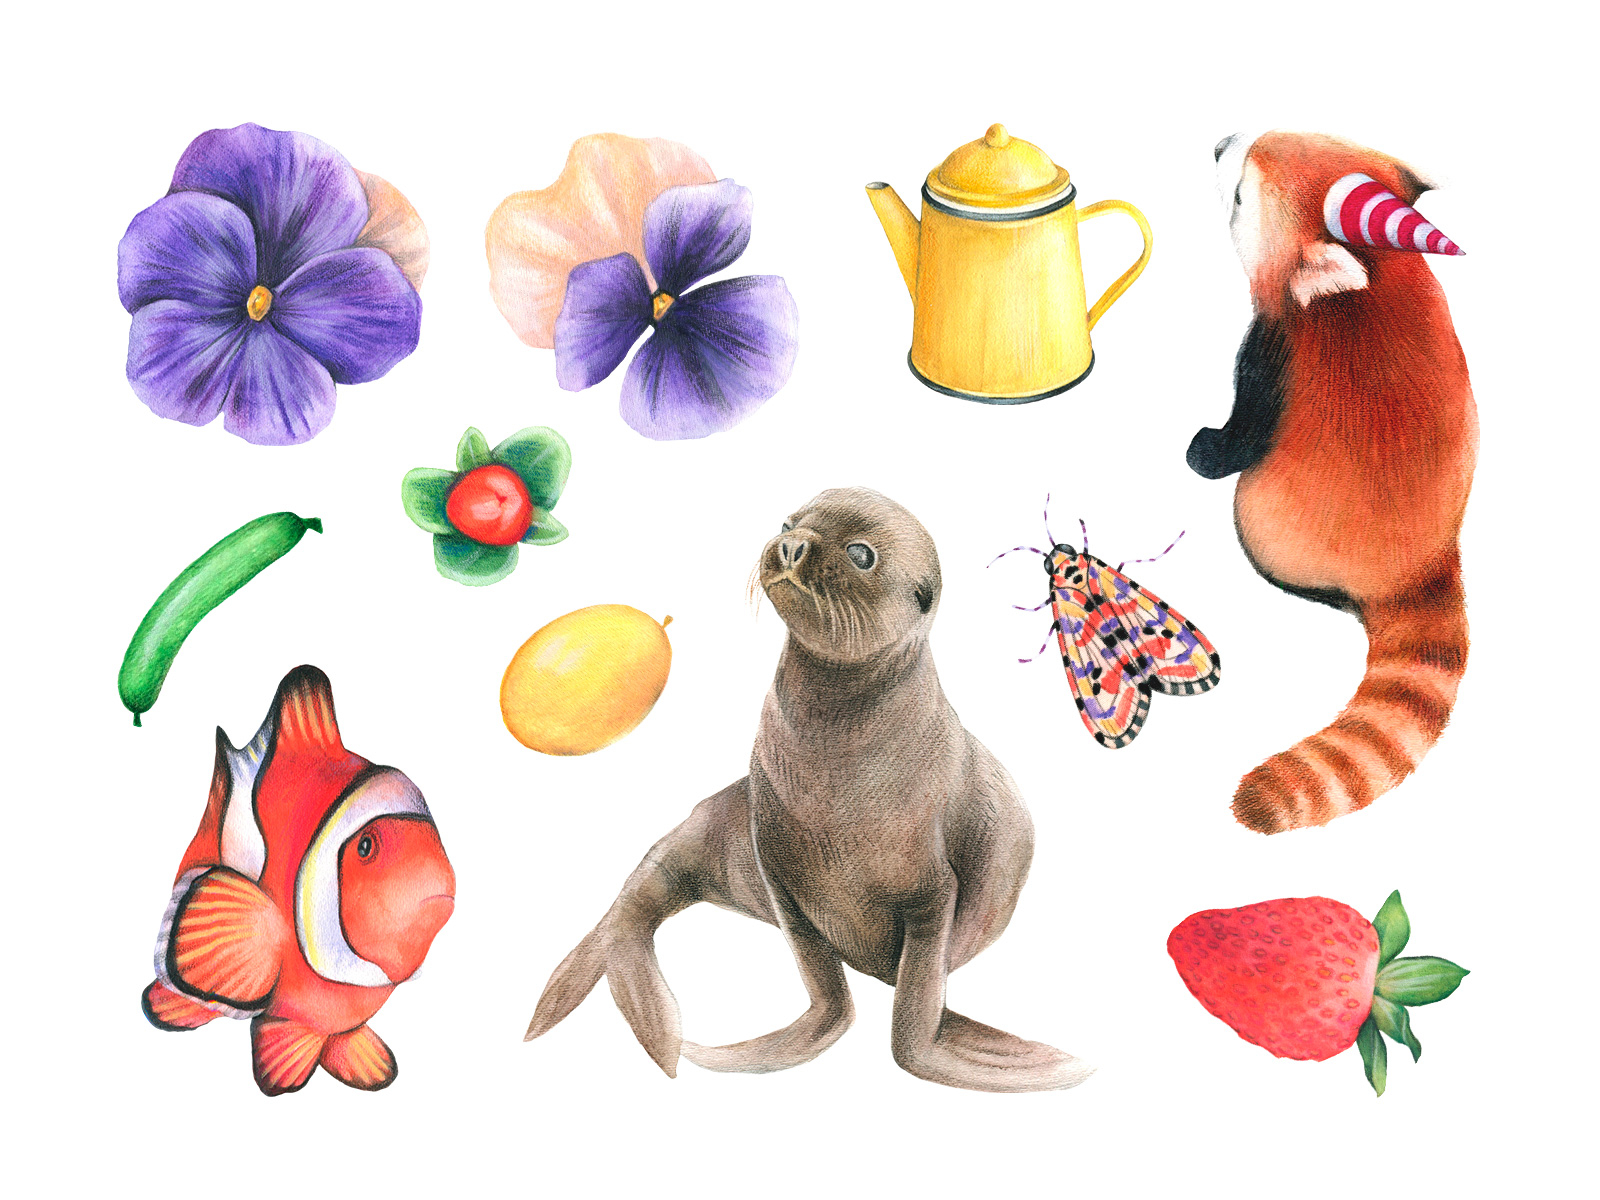 Cool Kids Watercolor Set animals children clipart download flowers graphic illustration kids manuka pixelbuddha png vector watercolor